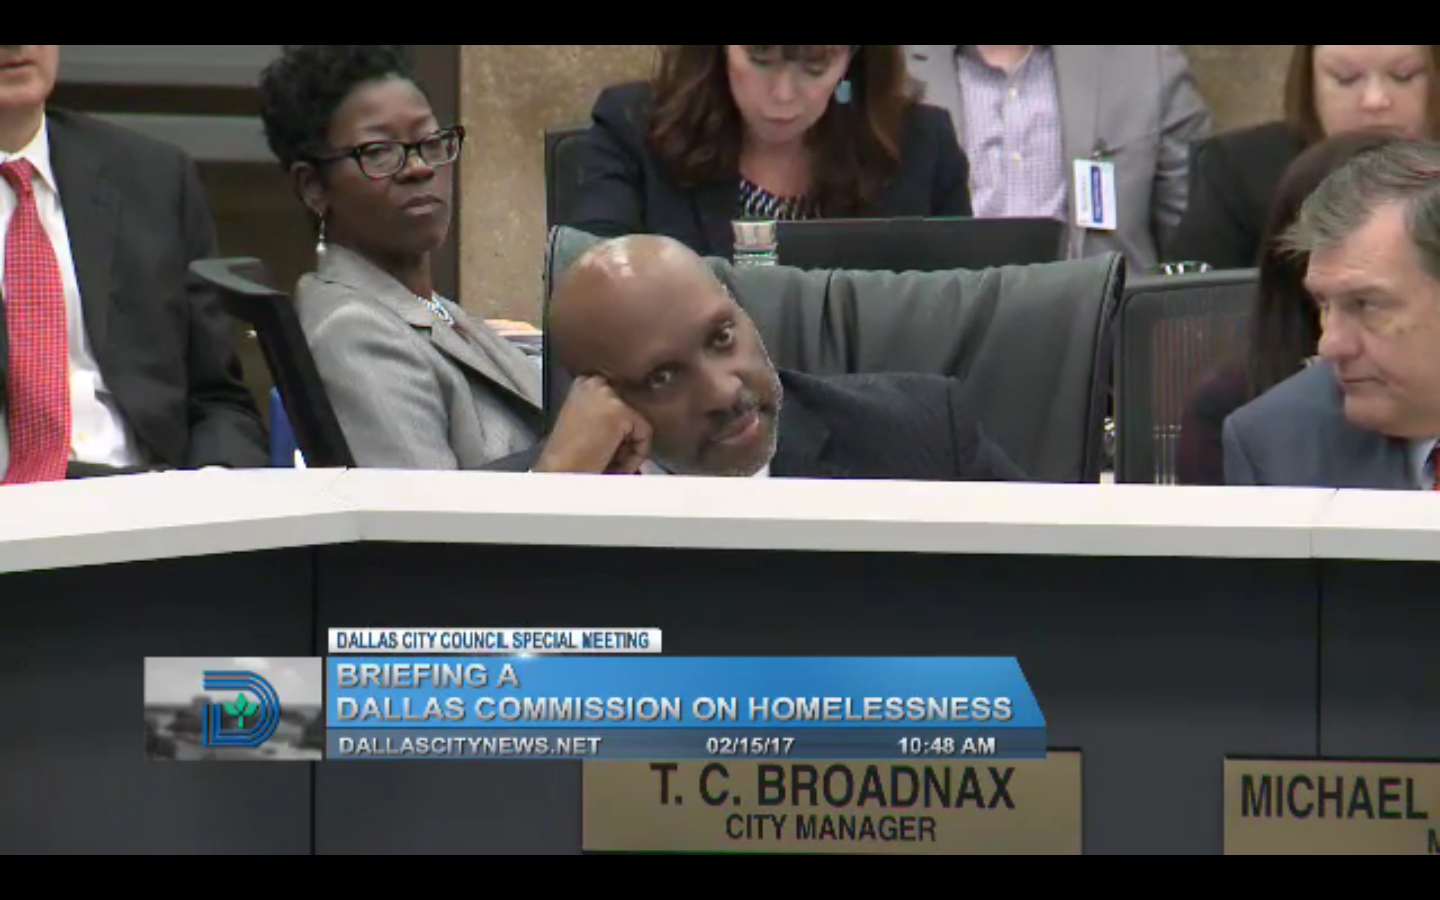 T.C. Broadnax hasn't been here long, but he already looks tired of the B.S.